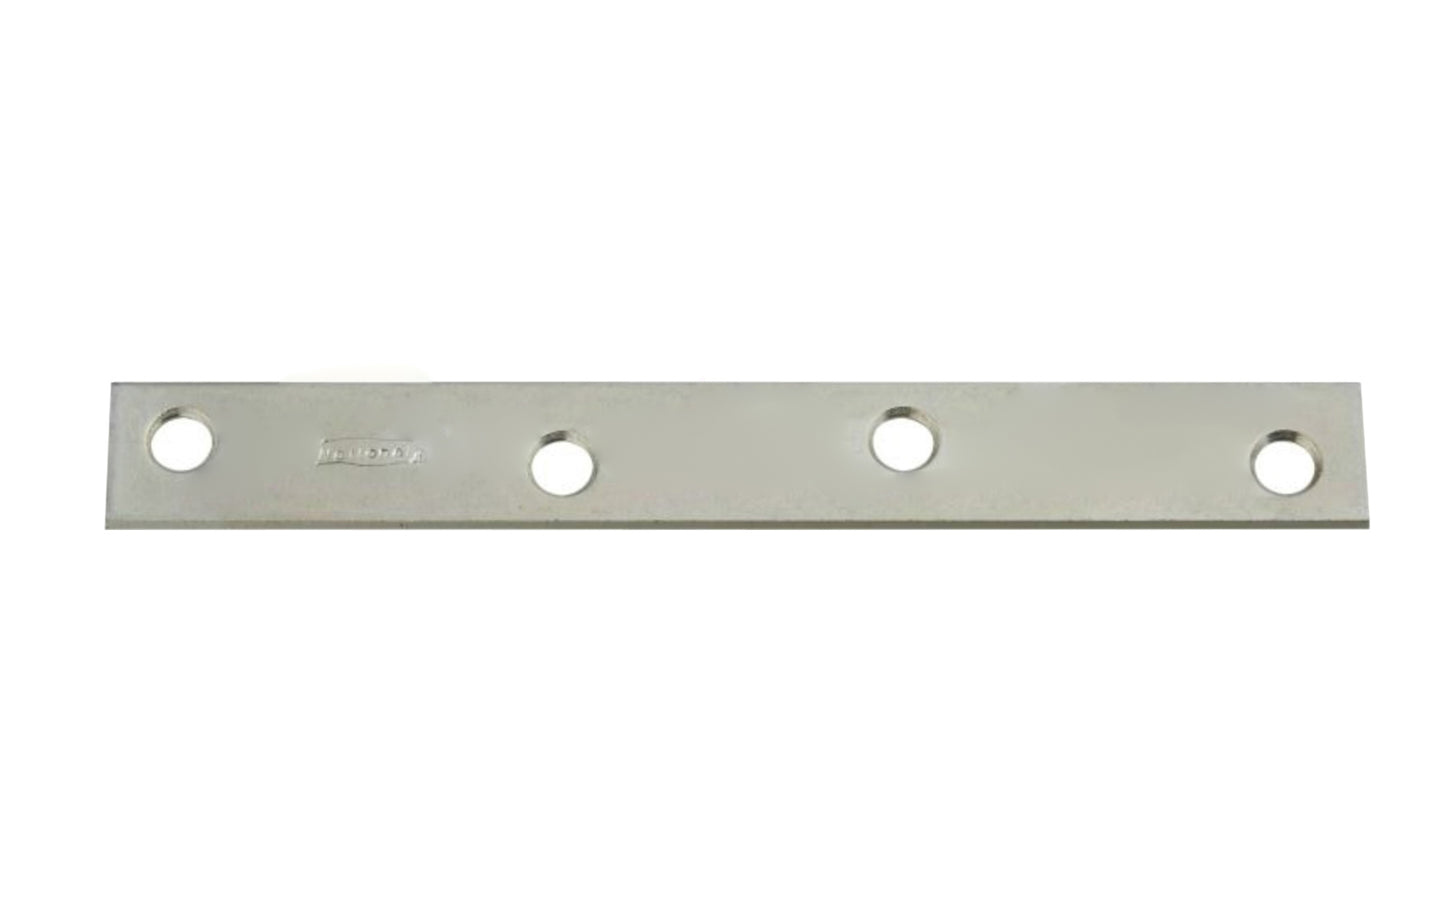 6" Zinc-Plated Mending Plate. These flat mending plate irons are designed for furniture, cabinets, shelving support, etc. Allows for quick & easy repair of items in the workshop, home, & other applications. Steel material with a zinc plated finish. Countersunk holes. 6" long size. National Hardware Model N220-285.